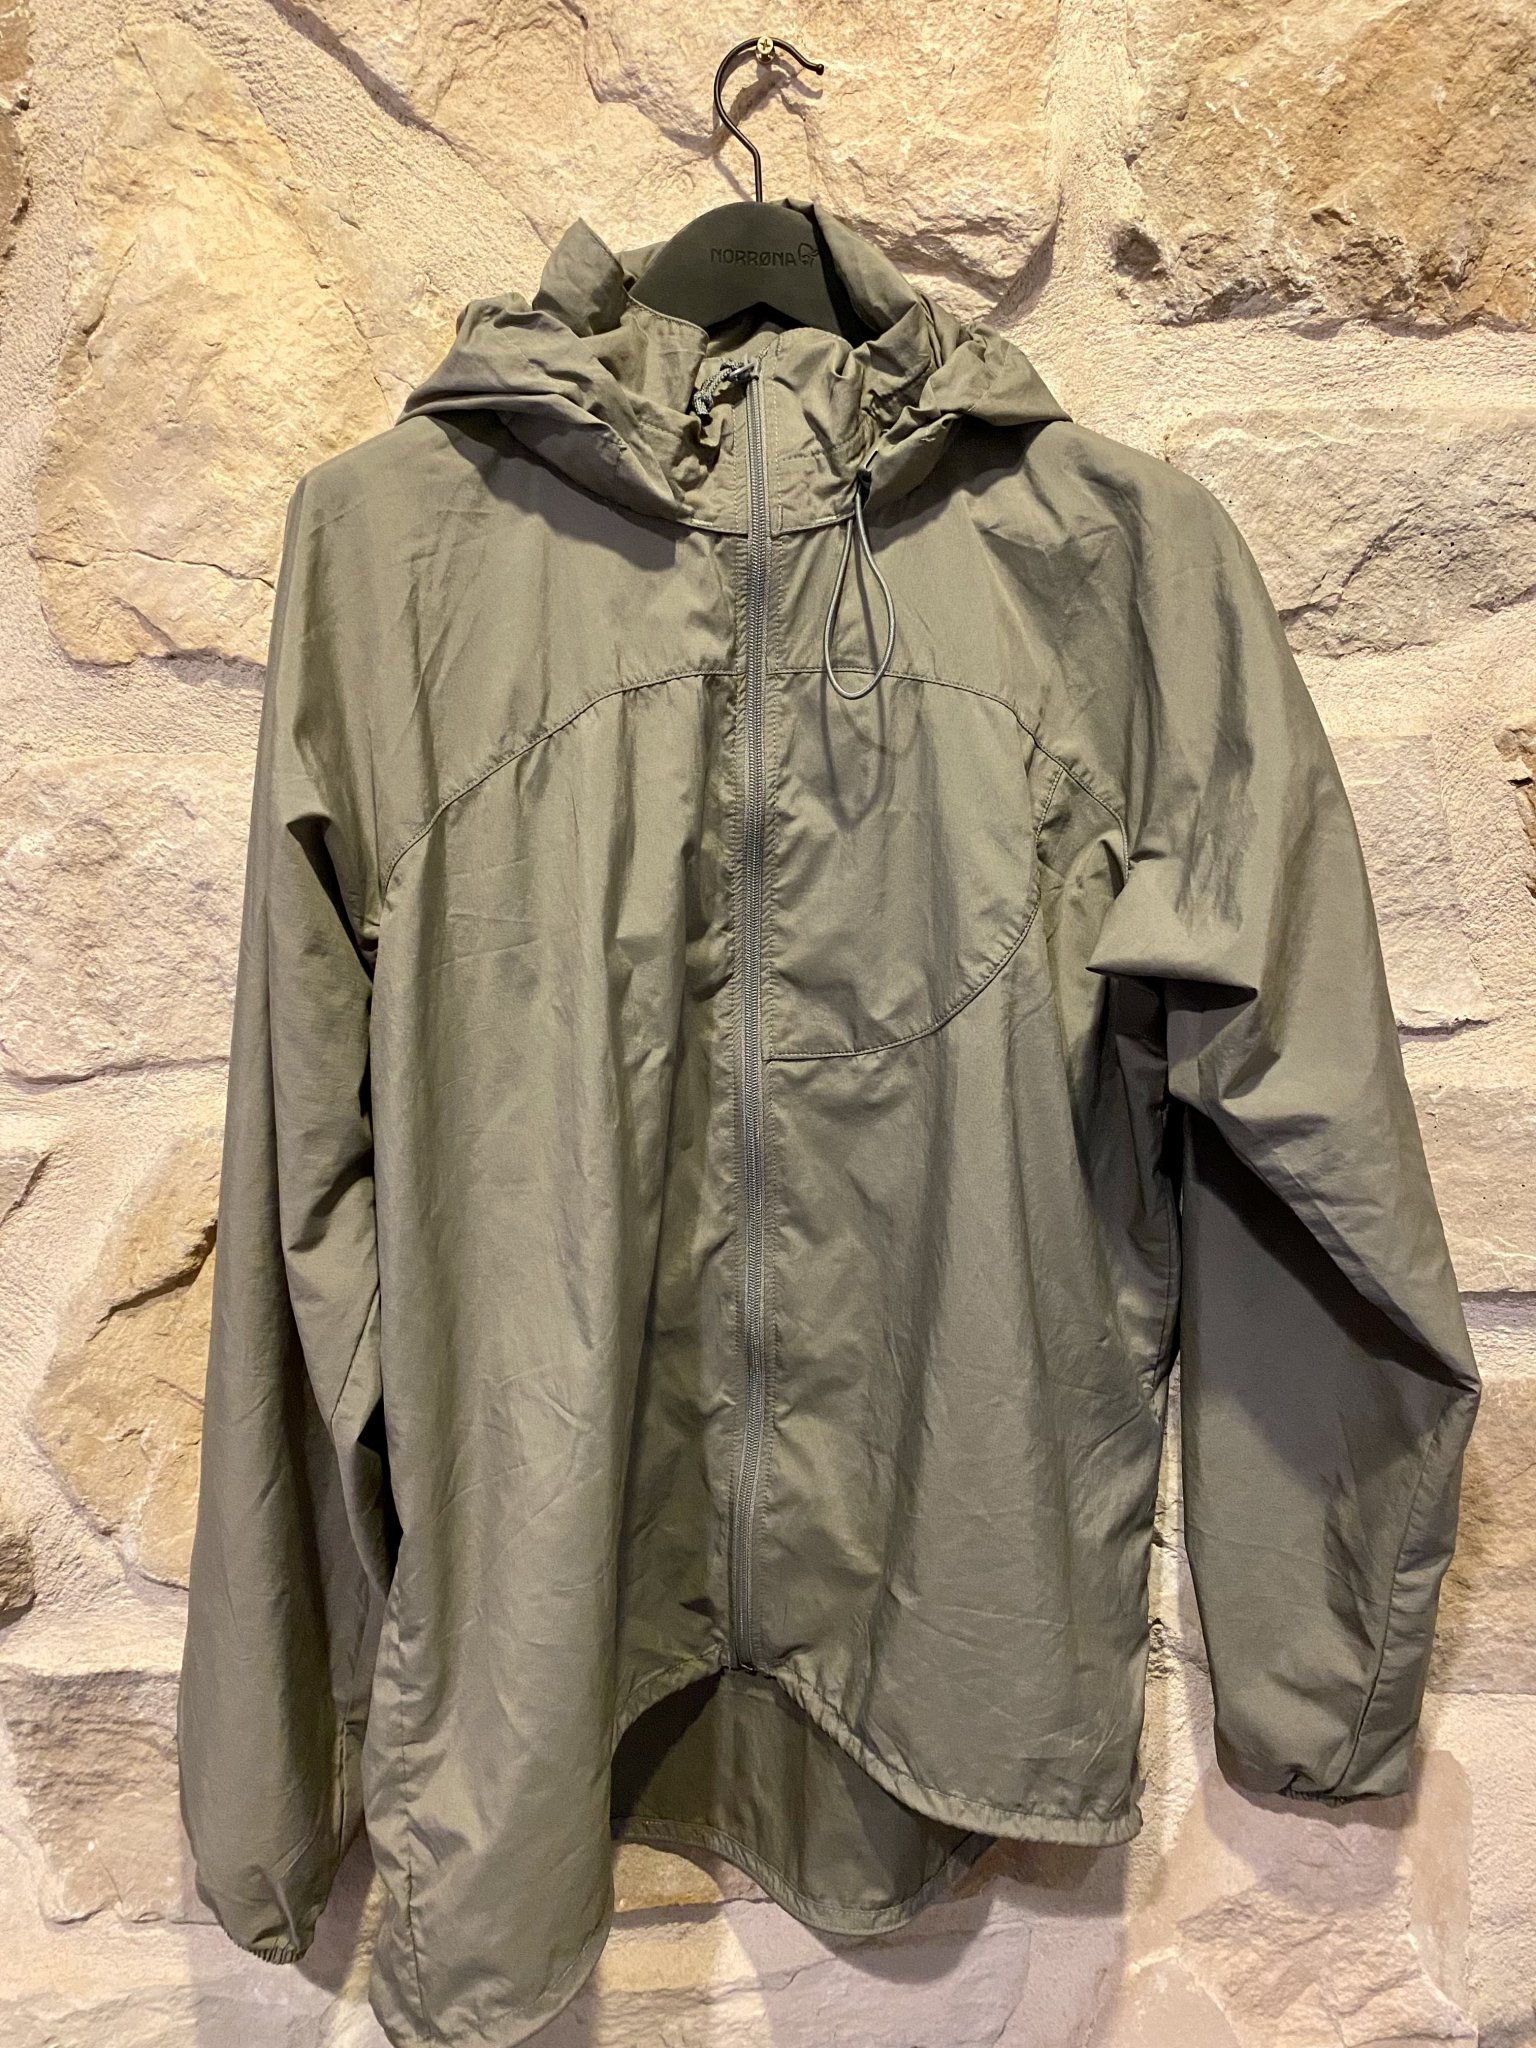 SOLD - $SOLD Patagonia Military Level 4 Windshirt L | Sniper's Hide Forum